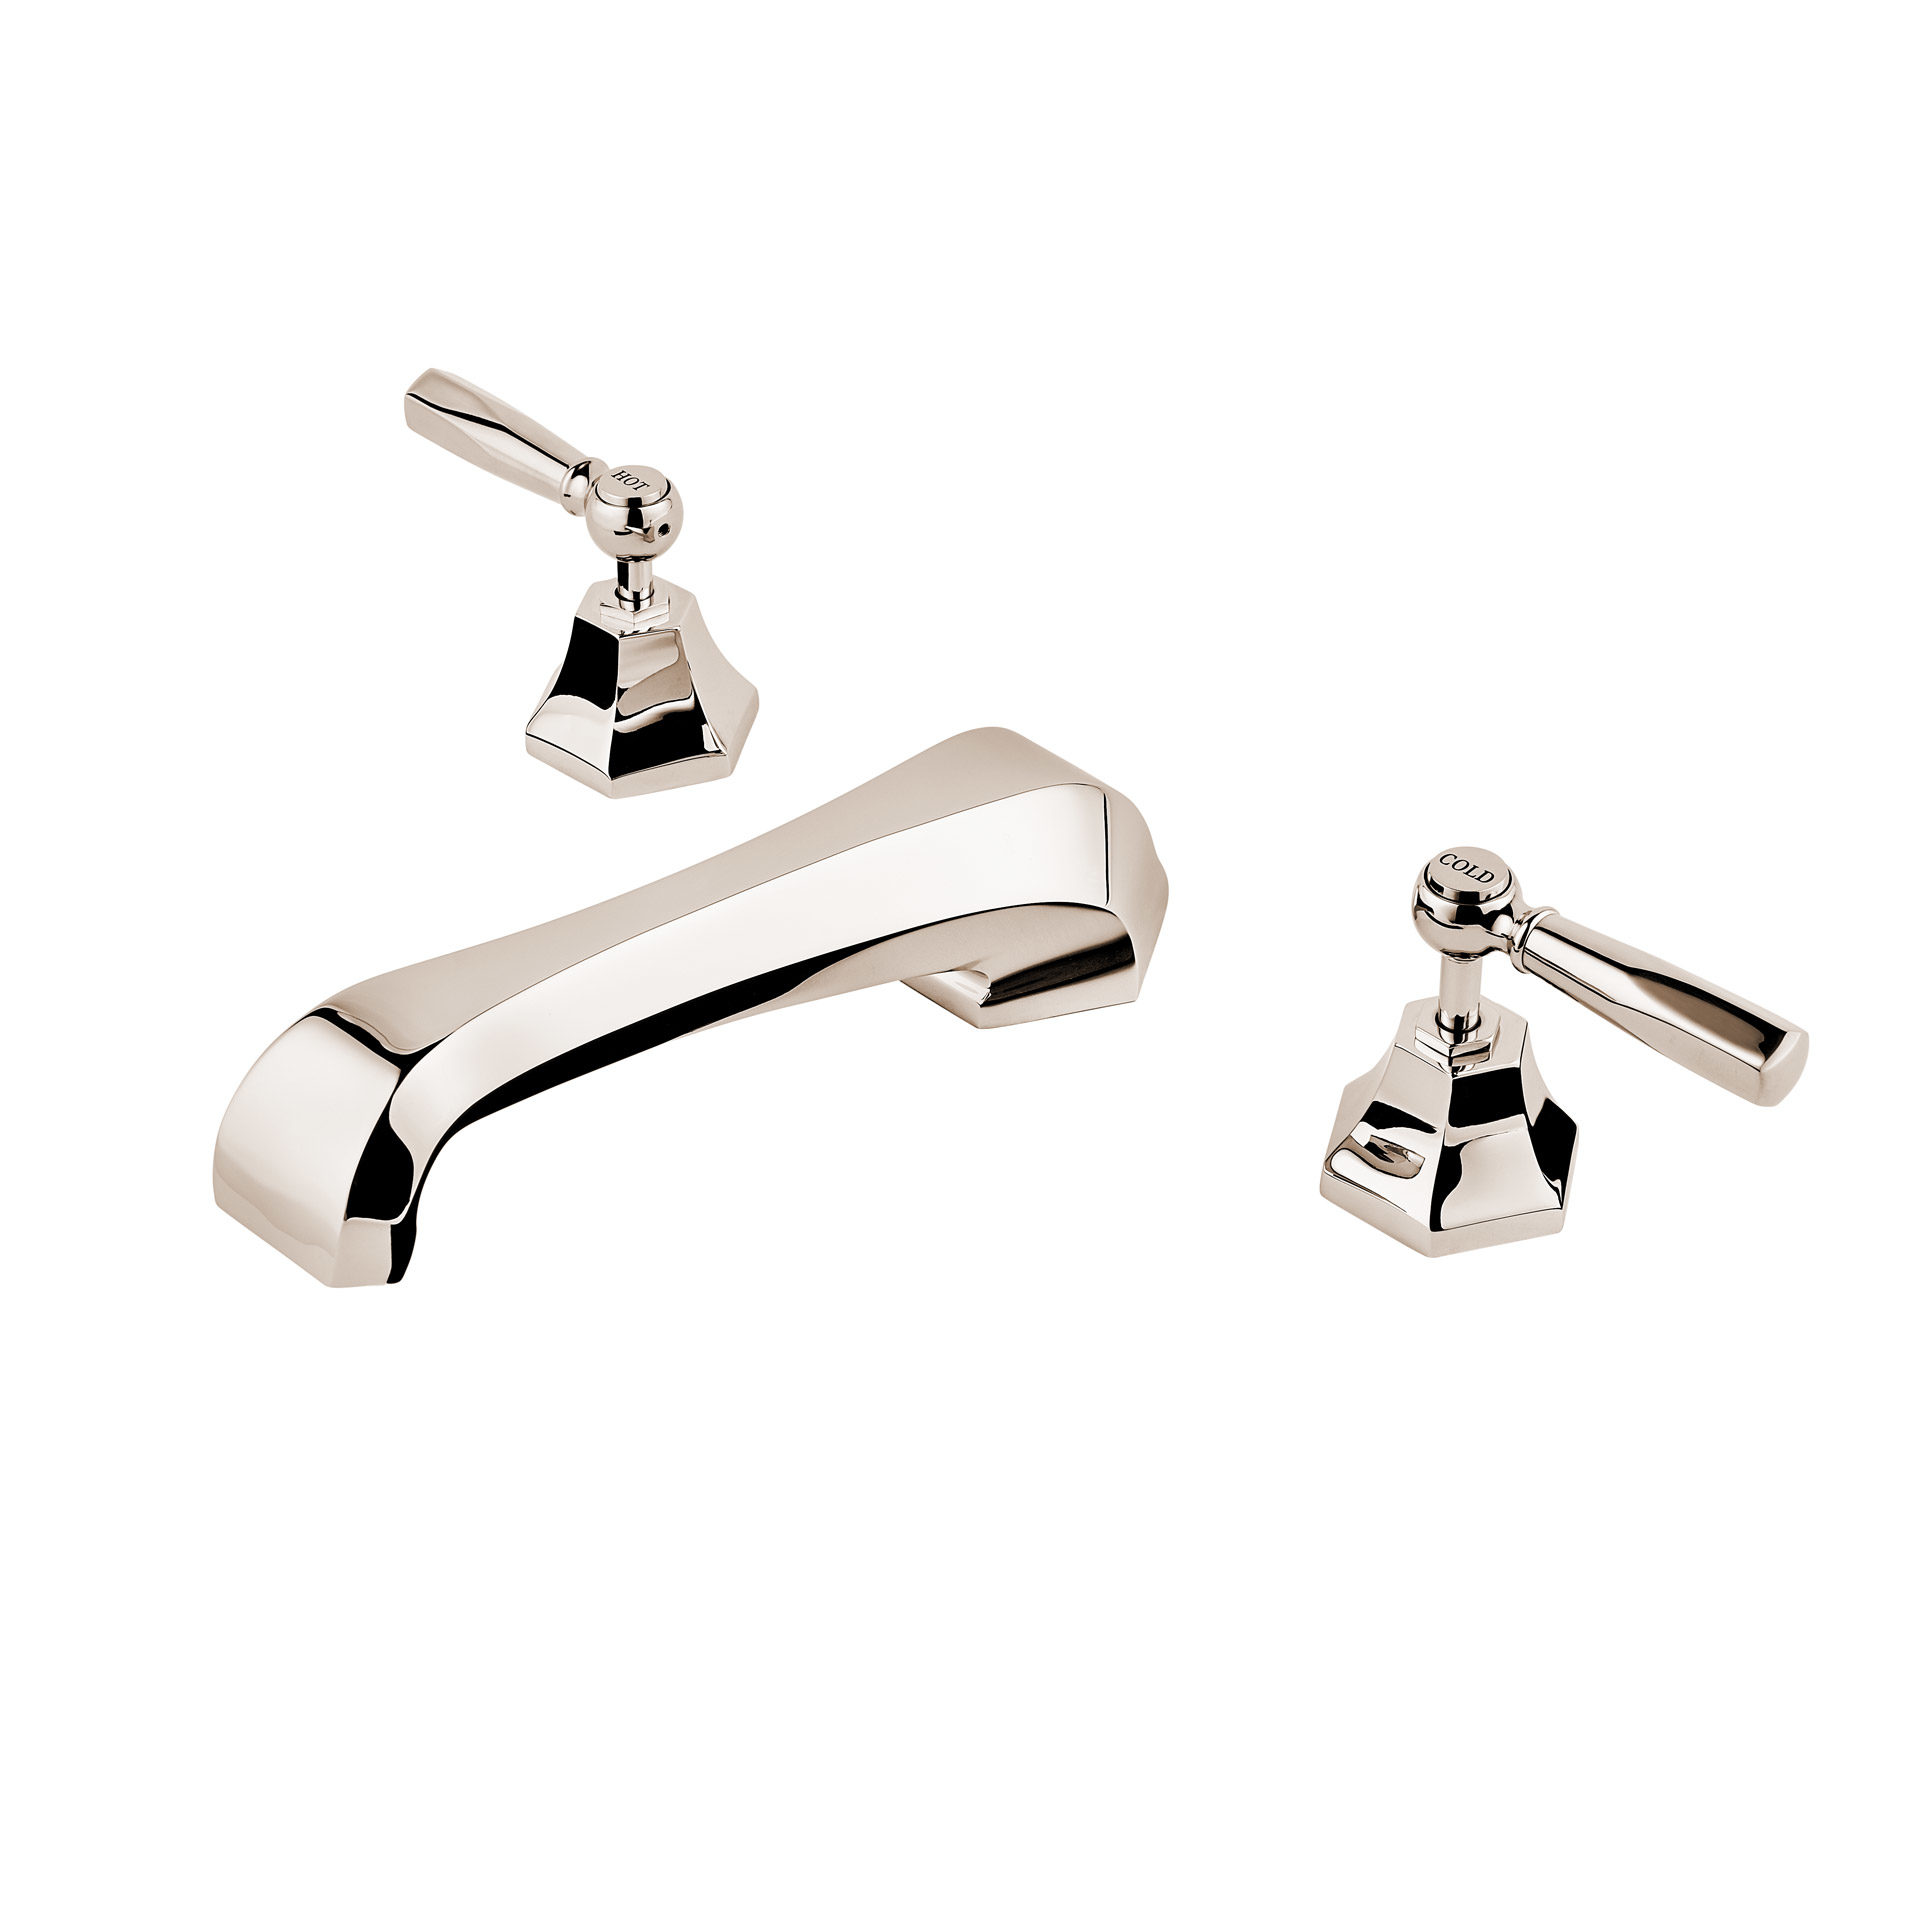 3 hole bath taps manufactured in UK by Barber Wilsons with customisable finishes